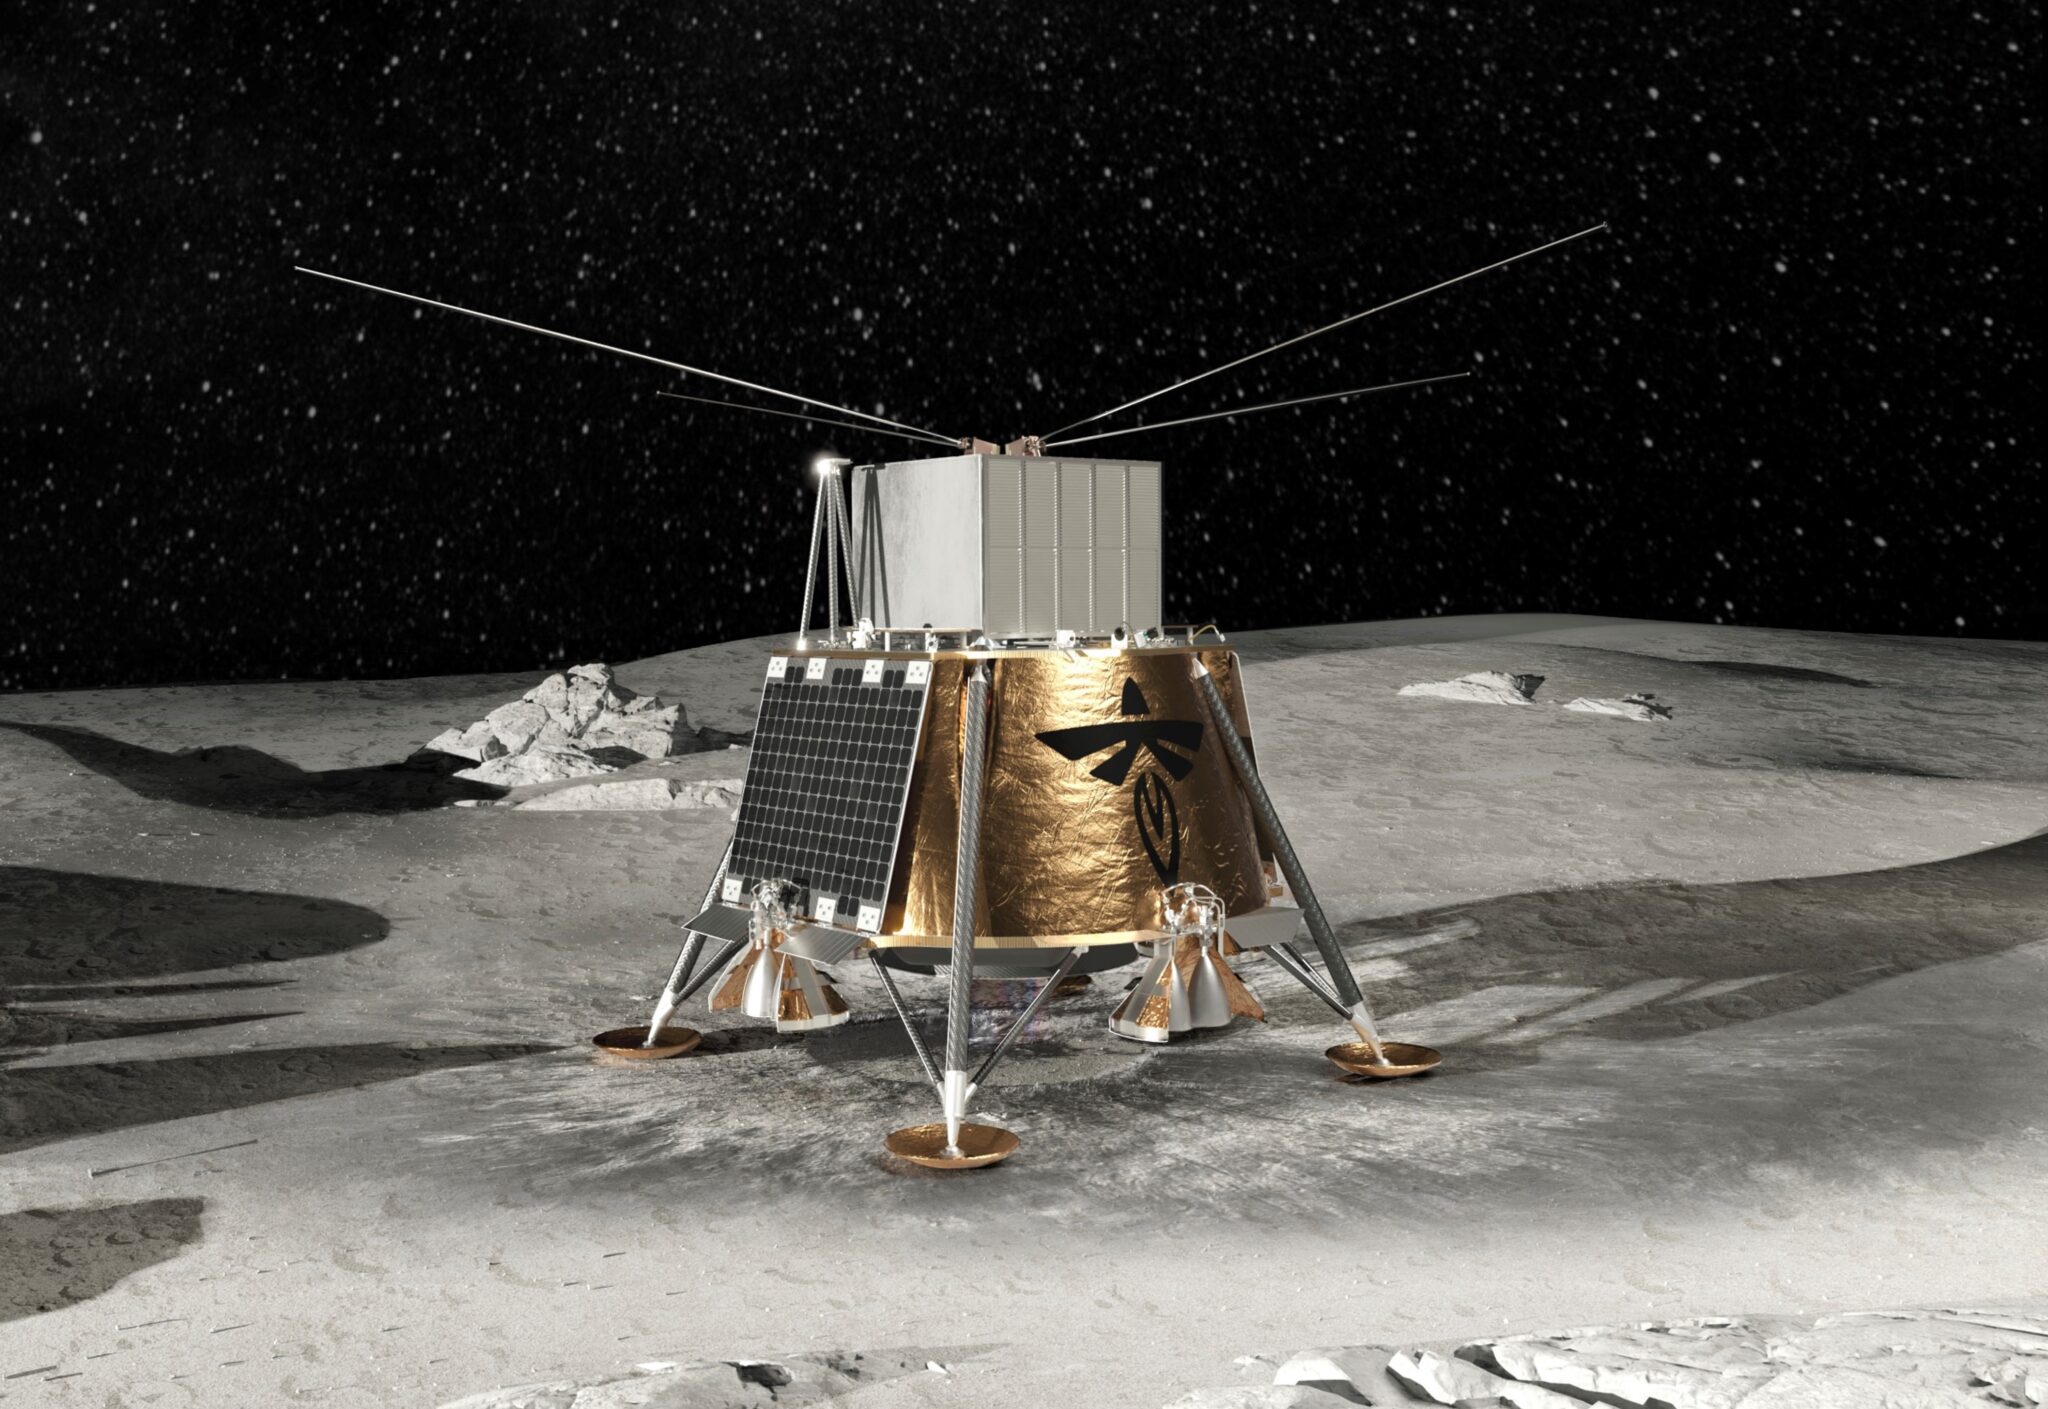 Firefly Aerospace Wraps Up Lander Construction Before NASA’s Lunar Mission